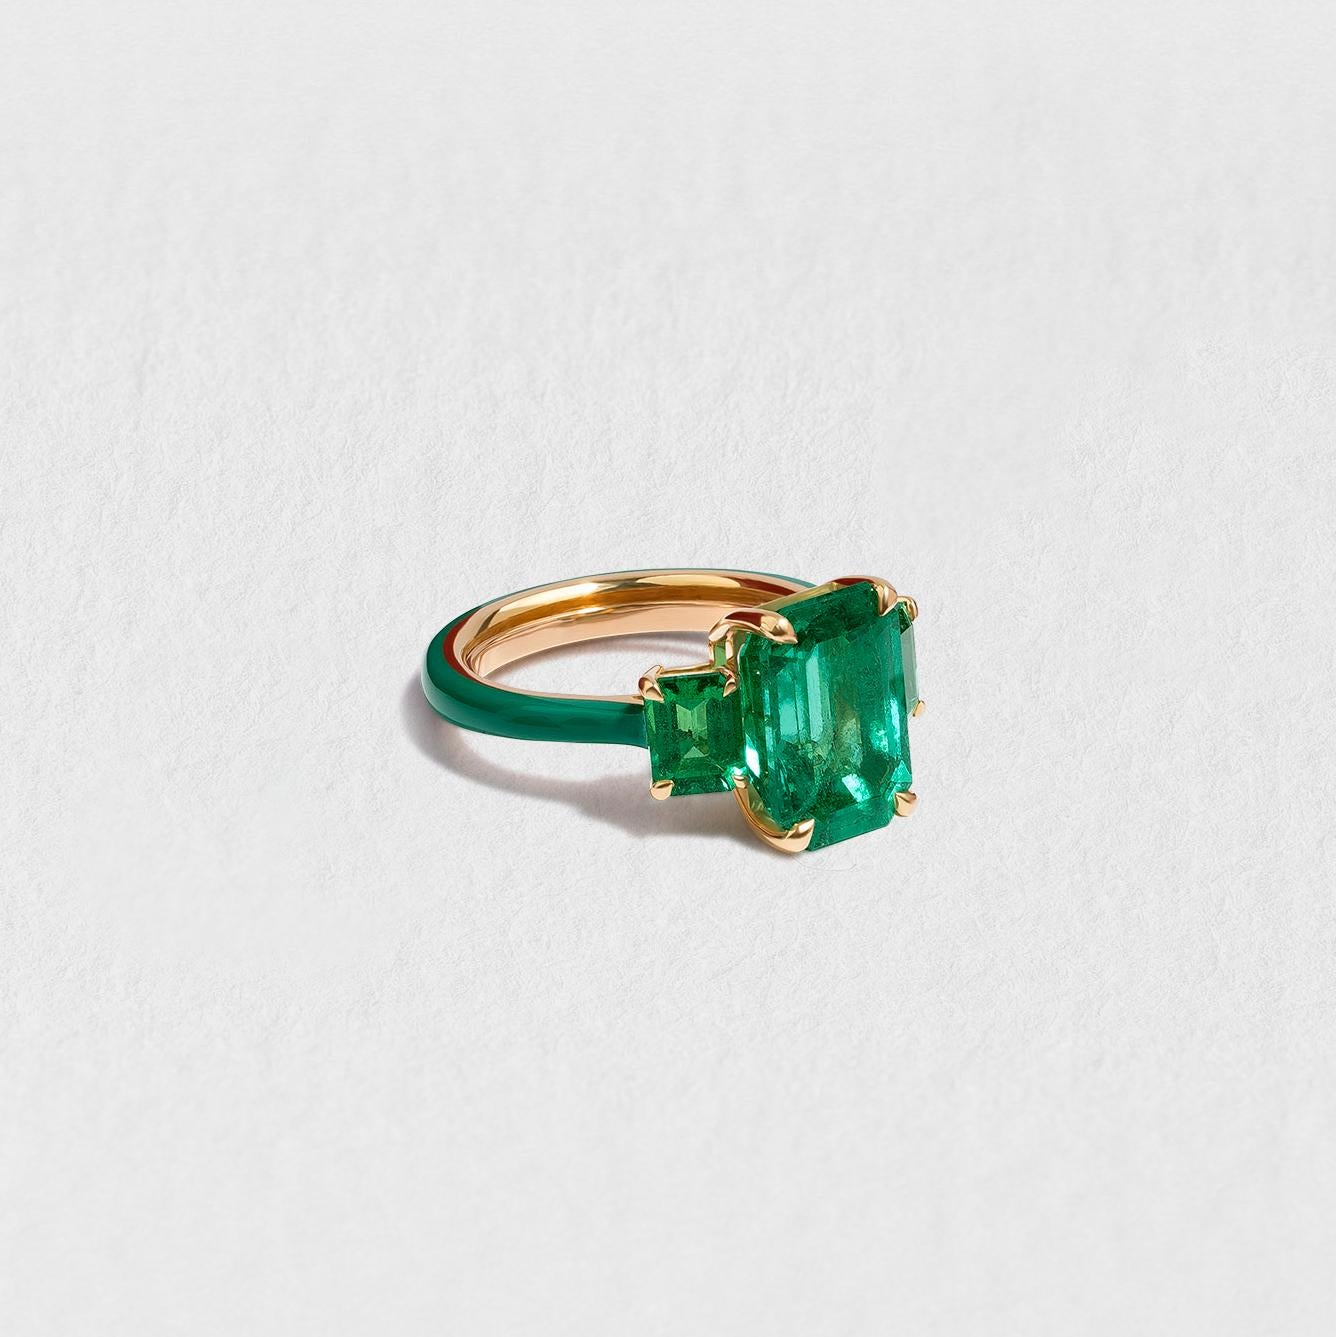 Handmade in our London atelier, this exquisite ring is a true one-off. The largest of its three stones originates from Brazil and is untreated, which is exceptionally rare for an emerald of its clarity and size. The ring’s 18-karat yellow gold band